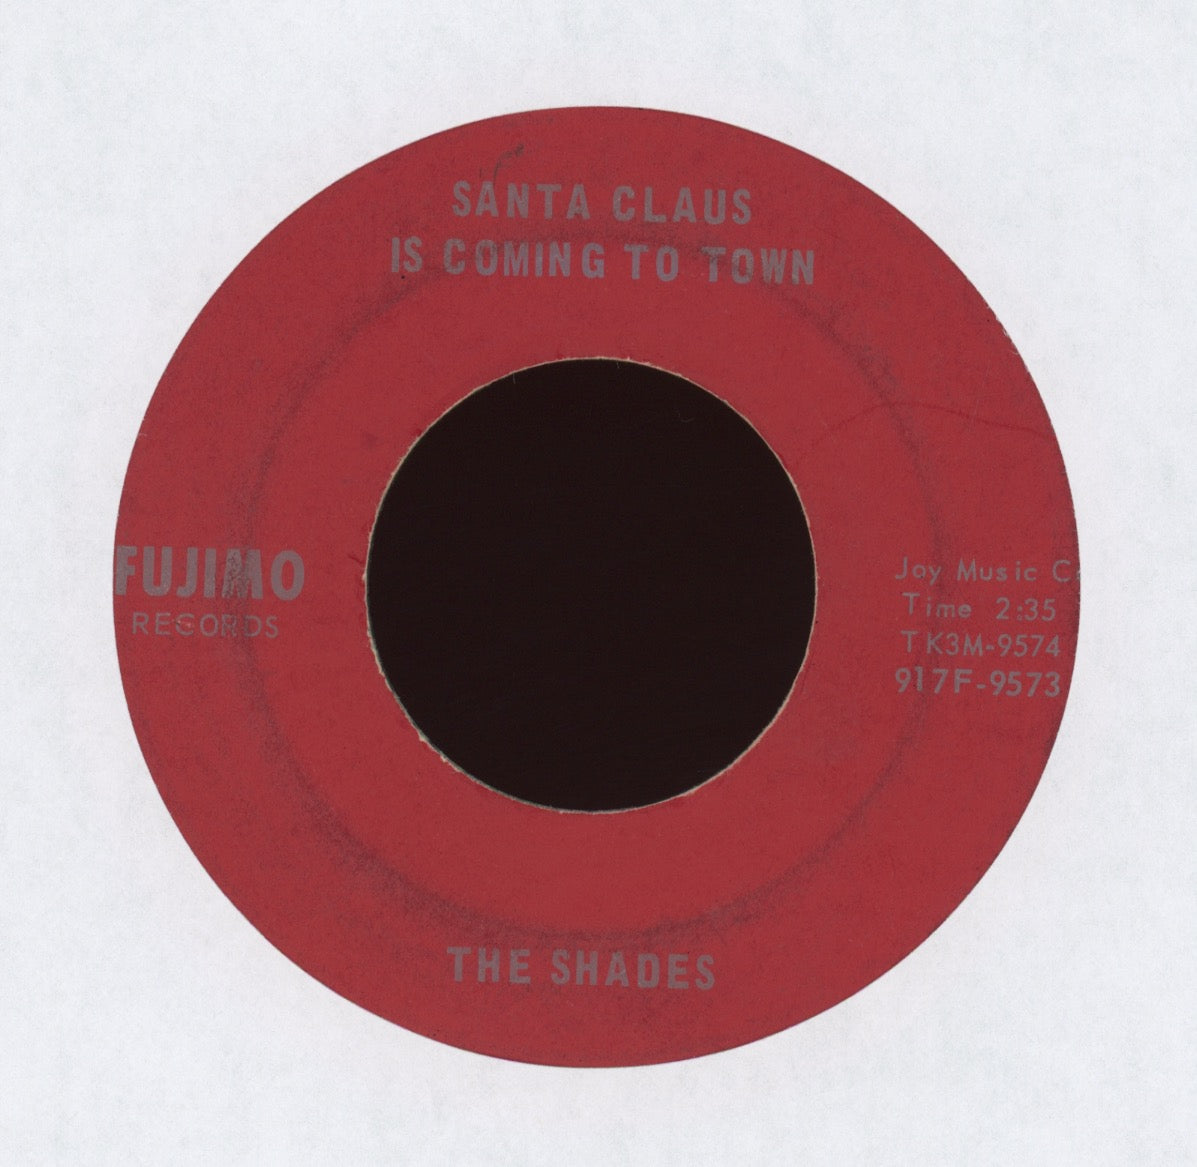 The Shades - Santa Claus Is Coming To Town  on Fujimo Pop Xmas 45